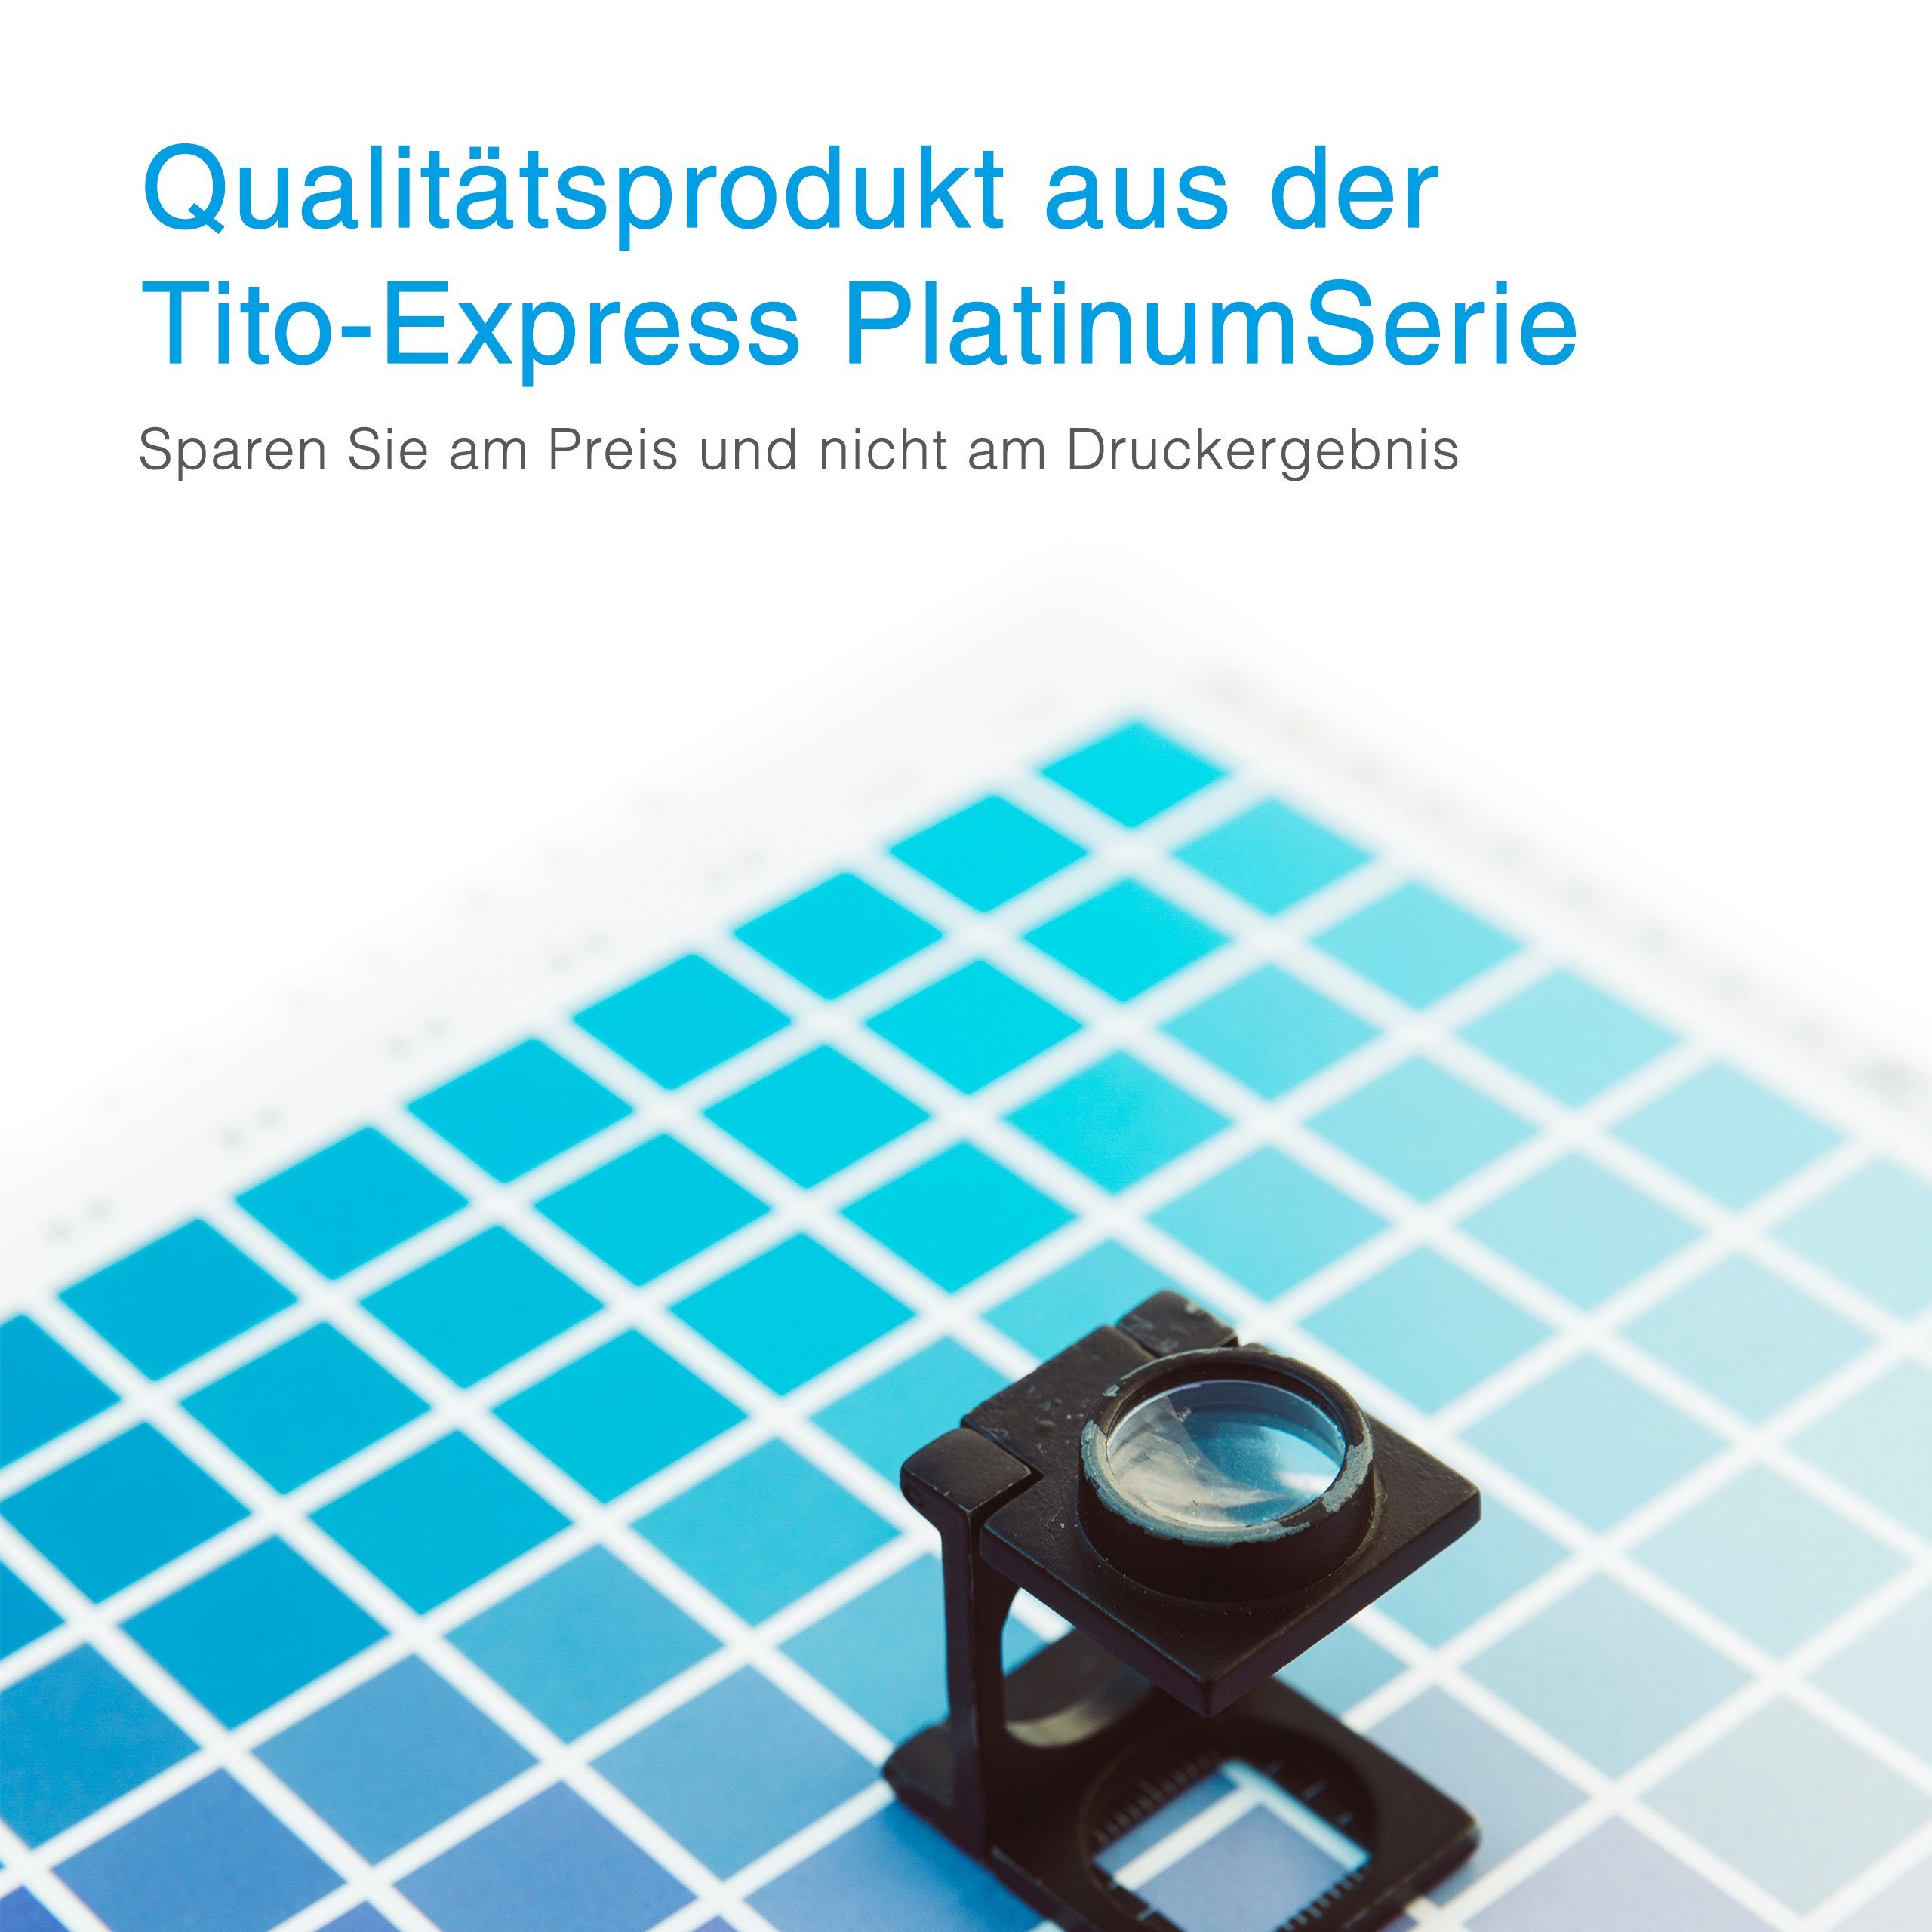 Tito-Express 117A, (Multipack, HP ersetzt W2071A Color W2073A Black, 150nw 1x W2070A W2072A Laser Cyan, MFP-170 1x Set Tonerpatrone 178nwg 1x 179fwg für Magenta, 178nw 1x Yellow), HP MFP 4er 179fnw 150a